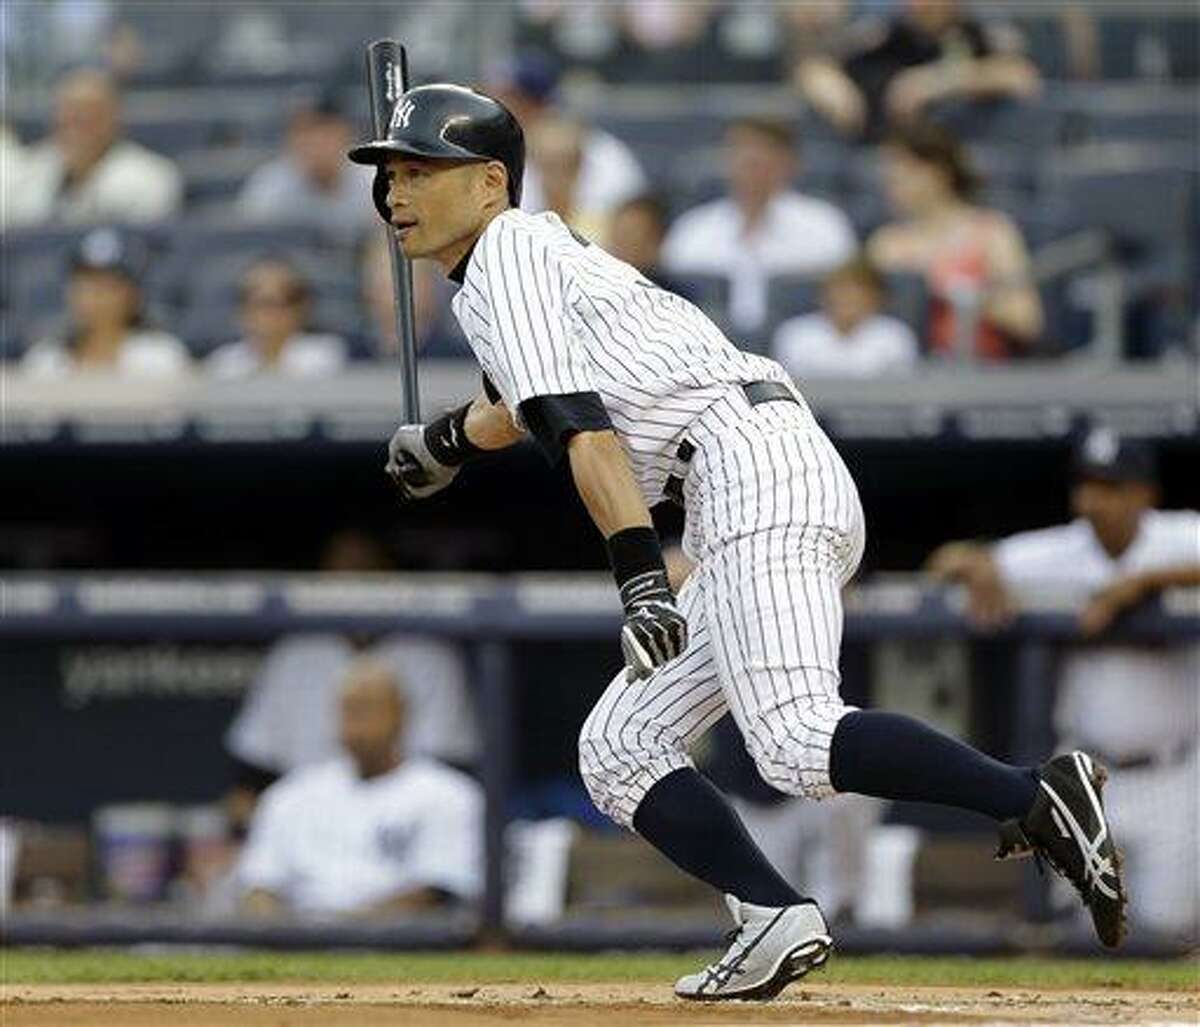 New York Yankees' Ichiro Suzuki follows through on a base hit off Texas Rangers starting pitcher Yu Darvish in the first inning of a baseball game Tuesday, June 25, 2013, in New York. (AP Photo/Kathy Willens)